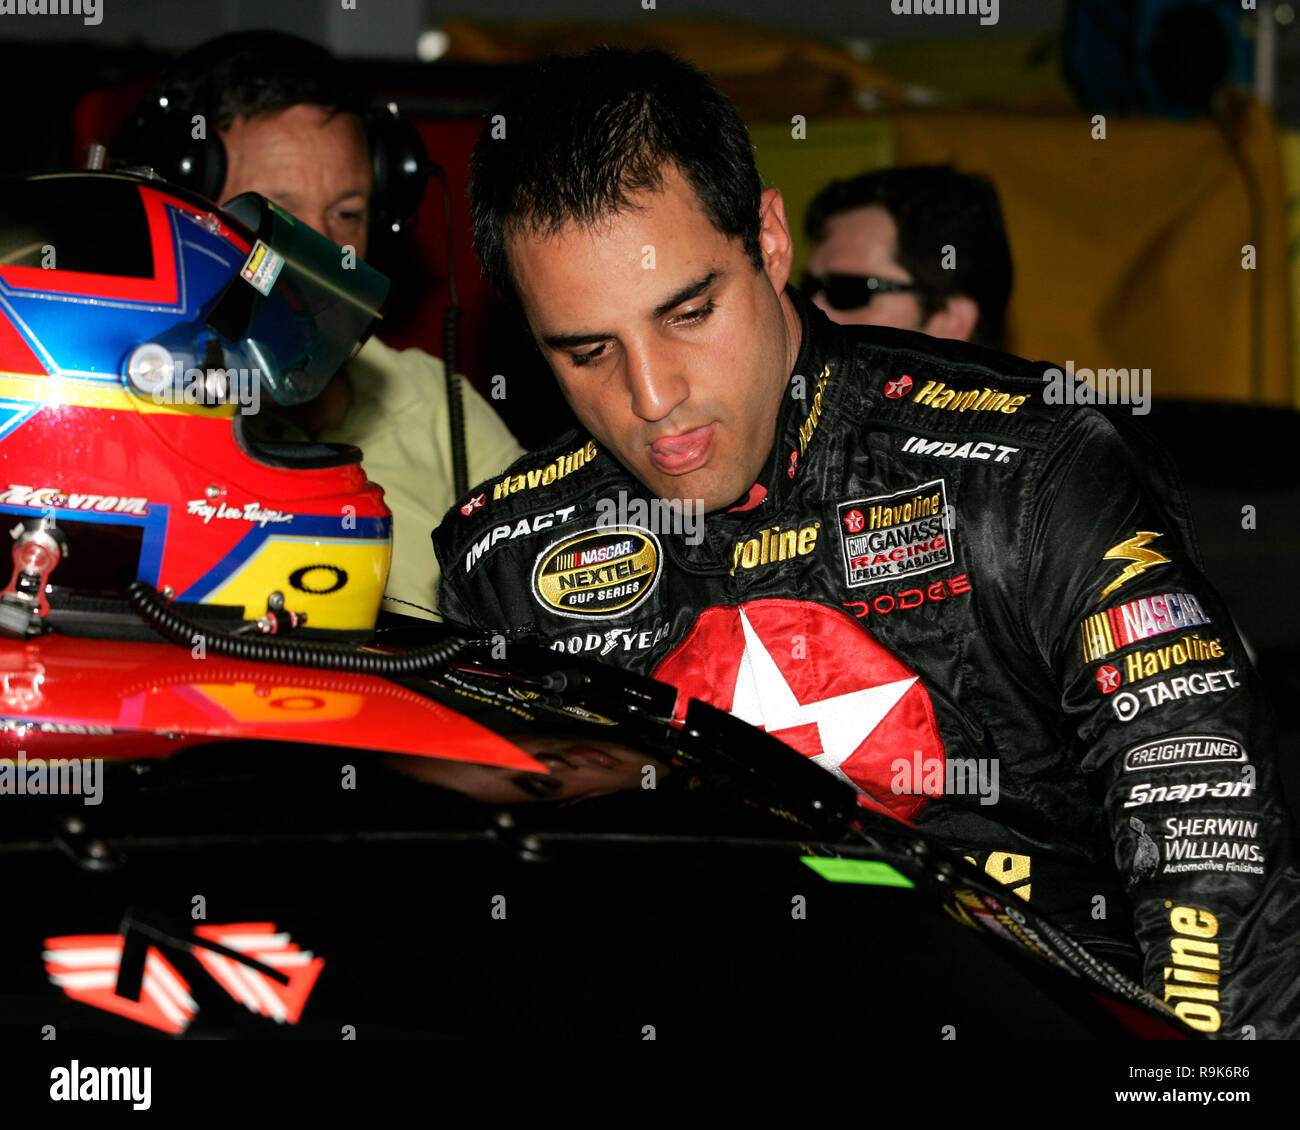 Juan Pablo Montoya of F1 racing fame, prepares to run in the NASCAR Busch series practice at Homestead-Miami Speedway in Homestead, Florida on November 17, 2006. Stock Photo